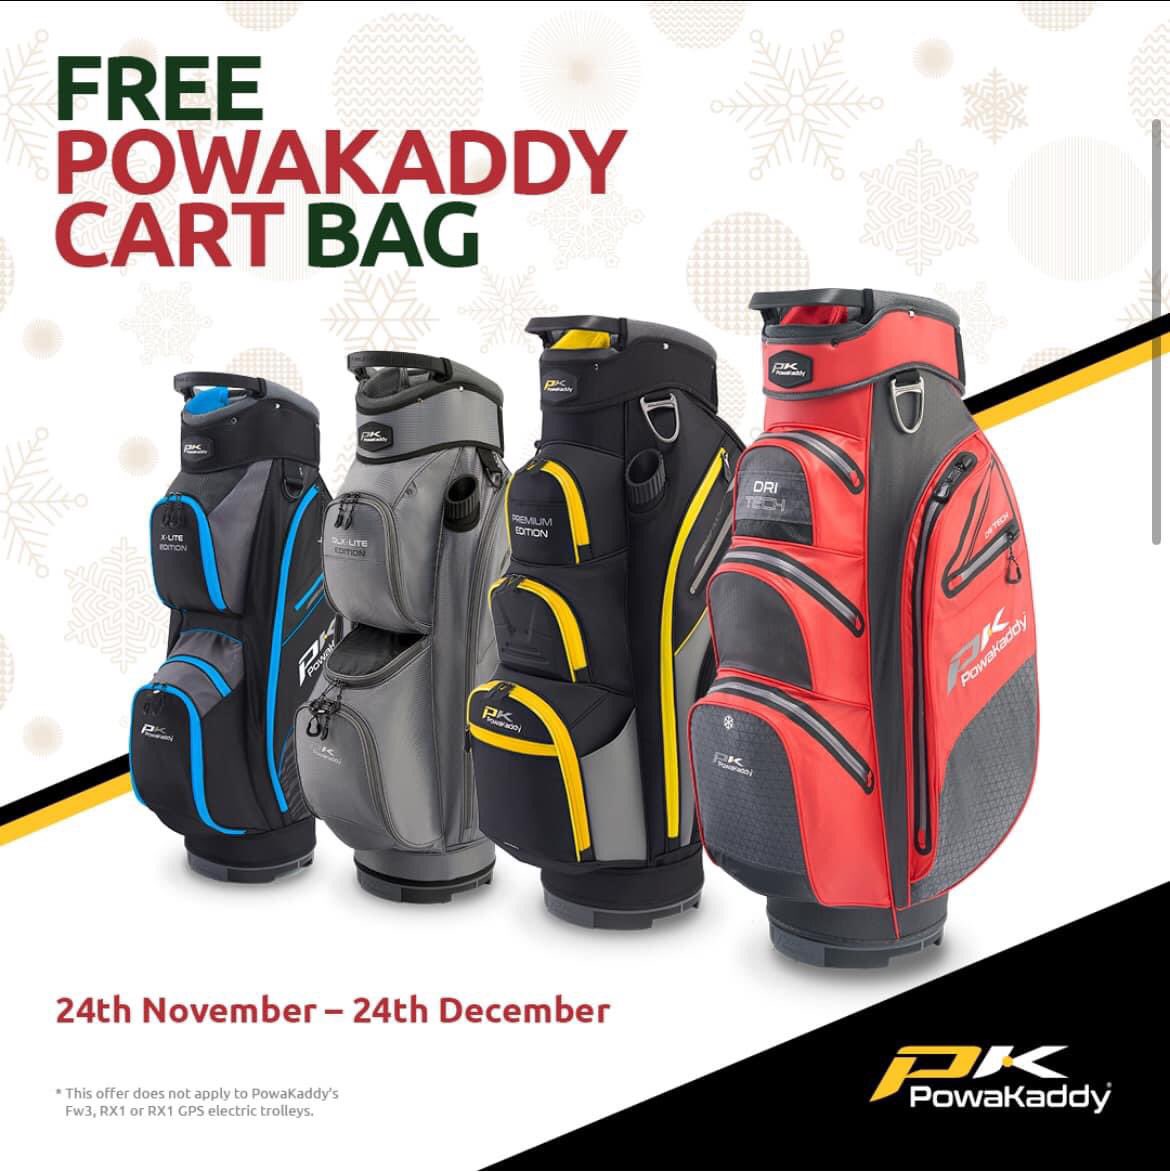 Powakaddy FREE Cart Bag Promotion 

FREE when you purchase a Powakaddy Electric Trolley.
Bag must be claimed with 28 days of purchase 

Offer starts Friday 24th November until December 24th. Trollies must be purchased between these dates to claim the free bag.